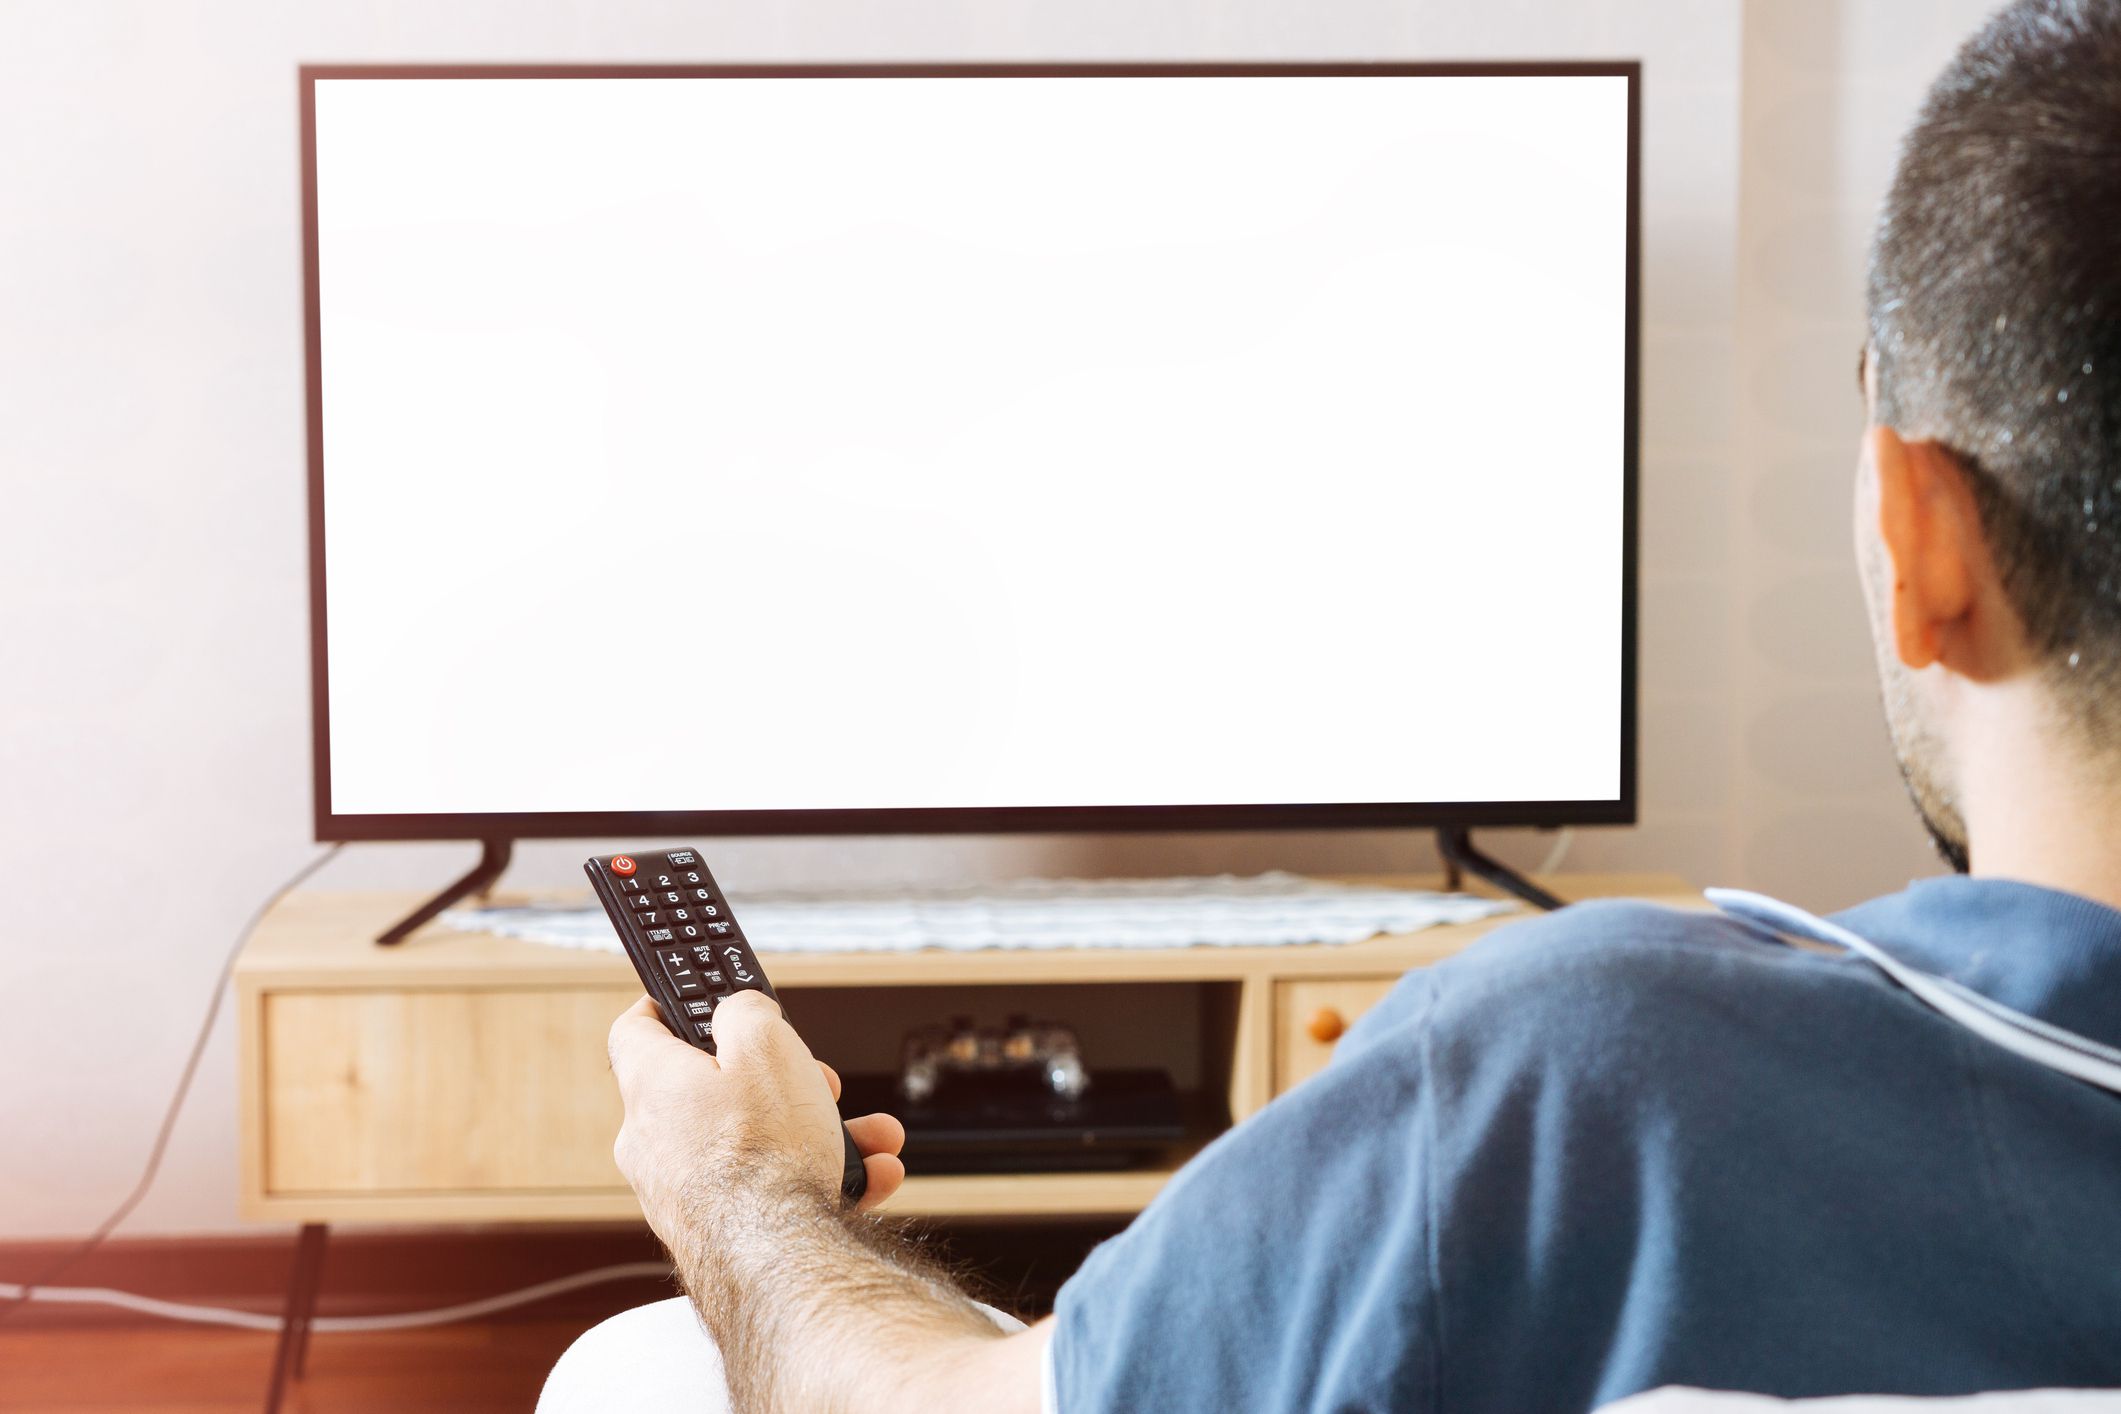 <p class="p3">With many streaming options available, you can eliminate your ancient, overpriced television package to cut your expenses each month. </p><p class="p3">But be careful! If you opt to purchase multiple streaming services, this can be more costly than your normal television package. Be sure to only purchase one or two streaming options so you can save money and cut your expenses. </p>